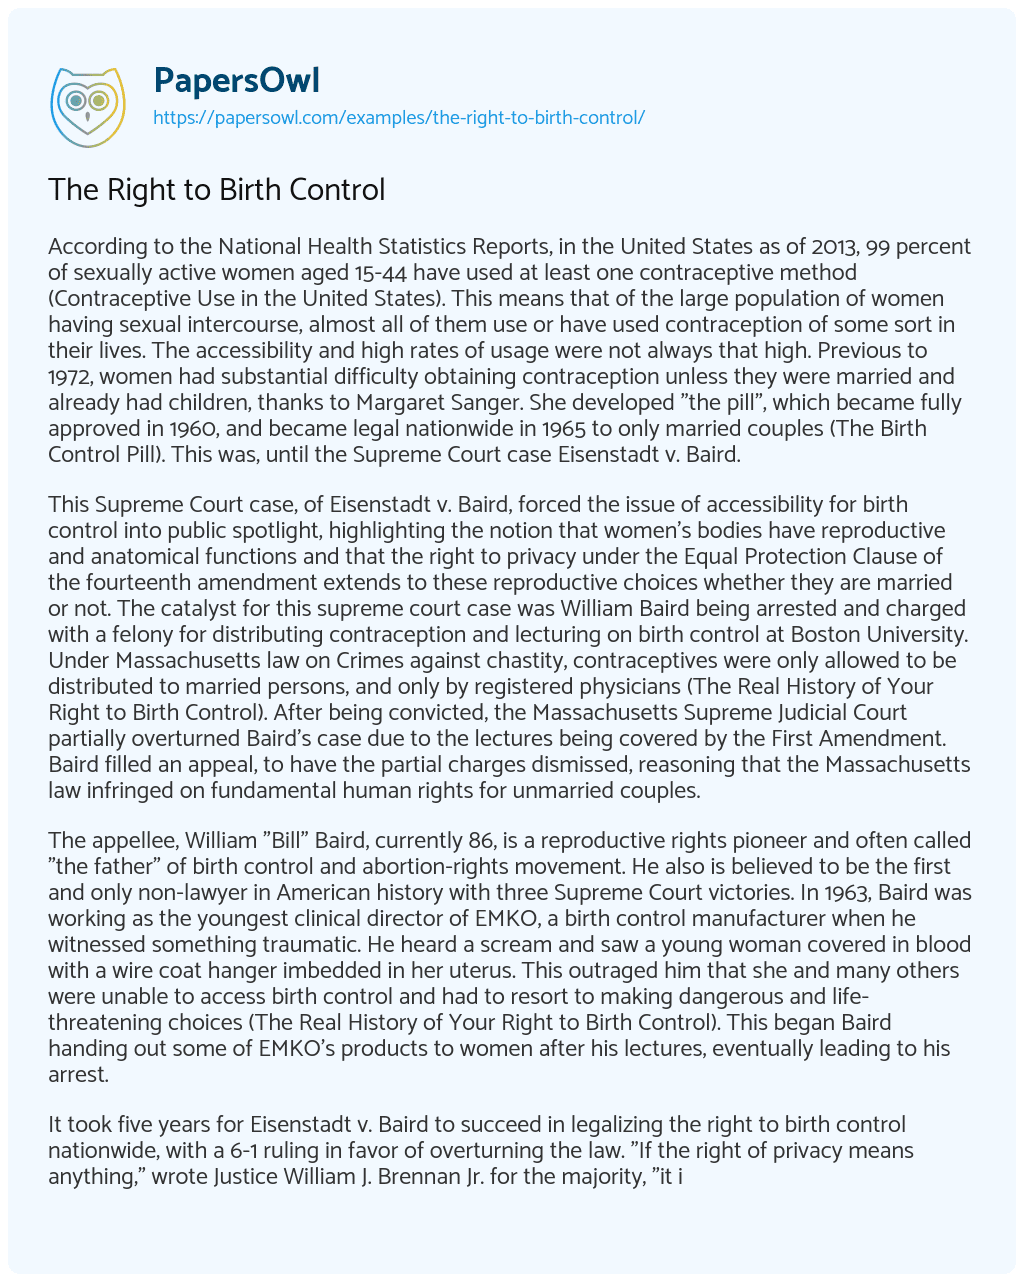 Essay on The Right to Birth Control